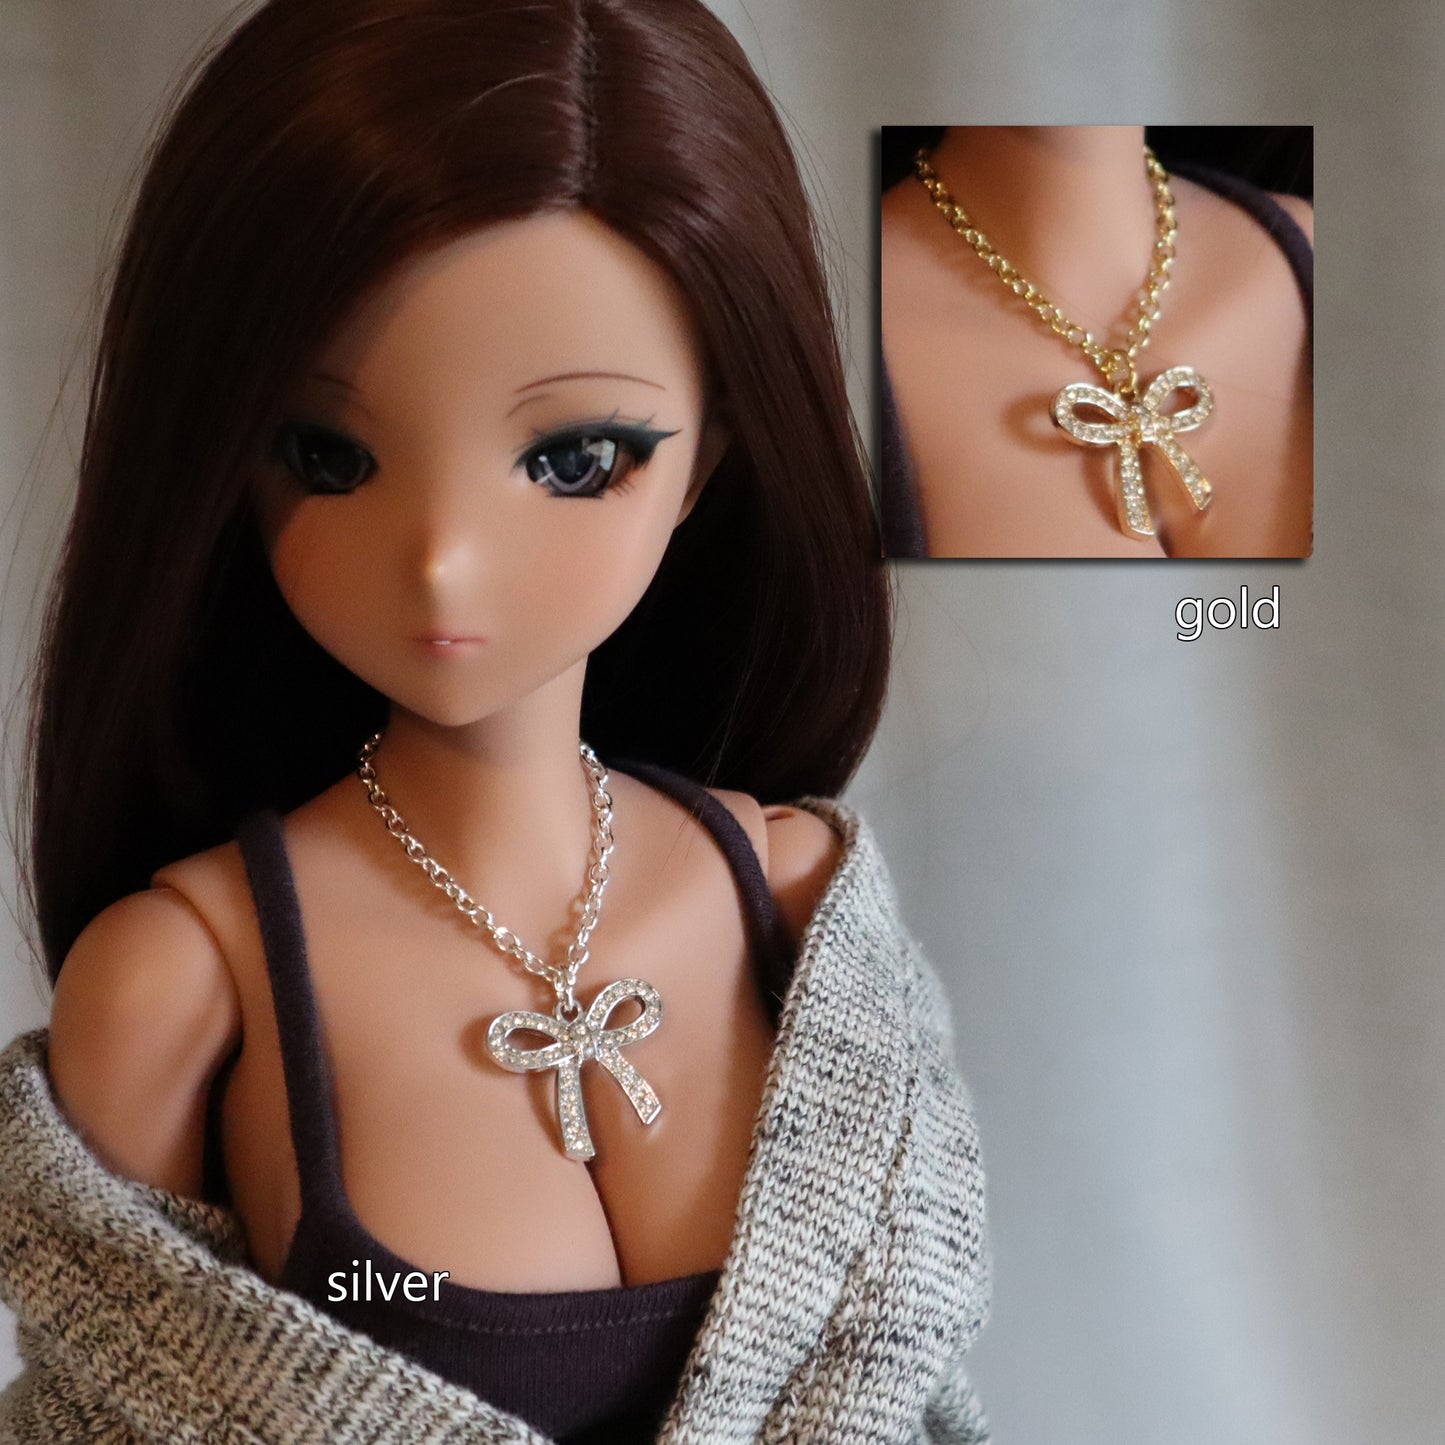 Magnetic Clasp Necklace for BJD - Dazzling Bows (Silver or Gold)